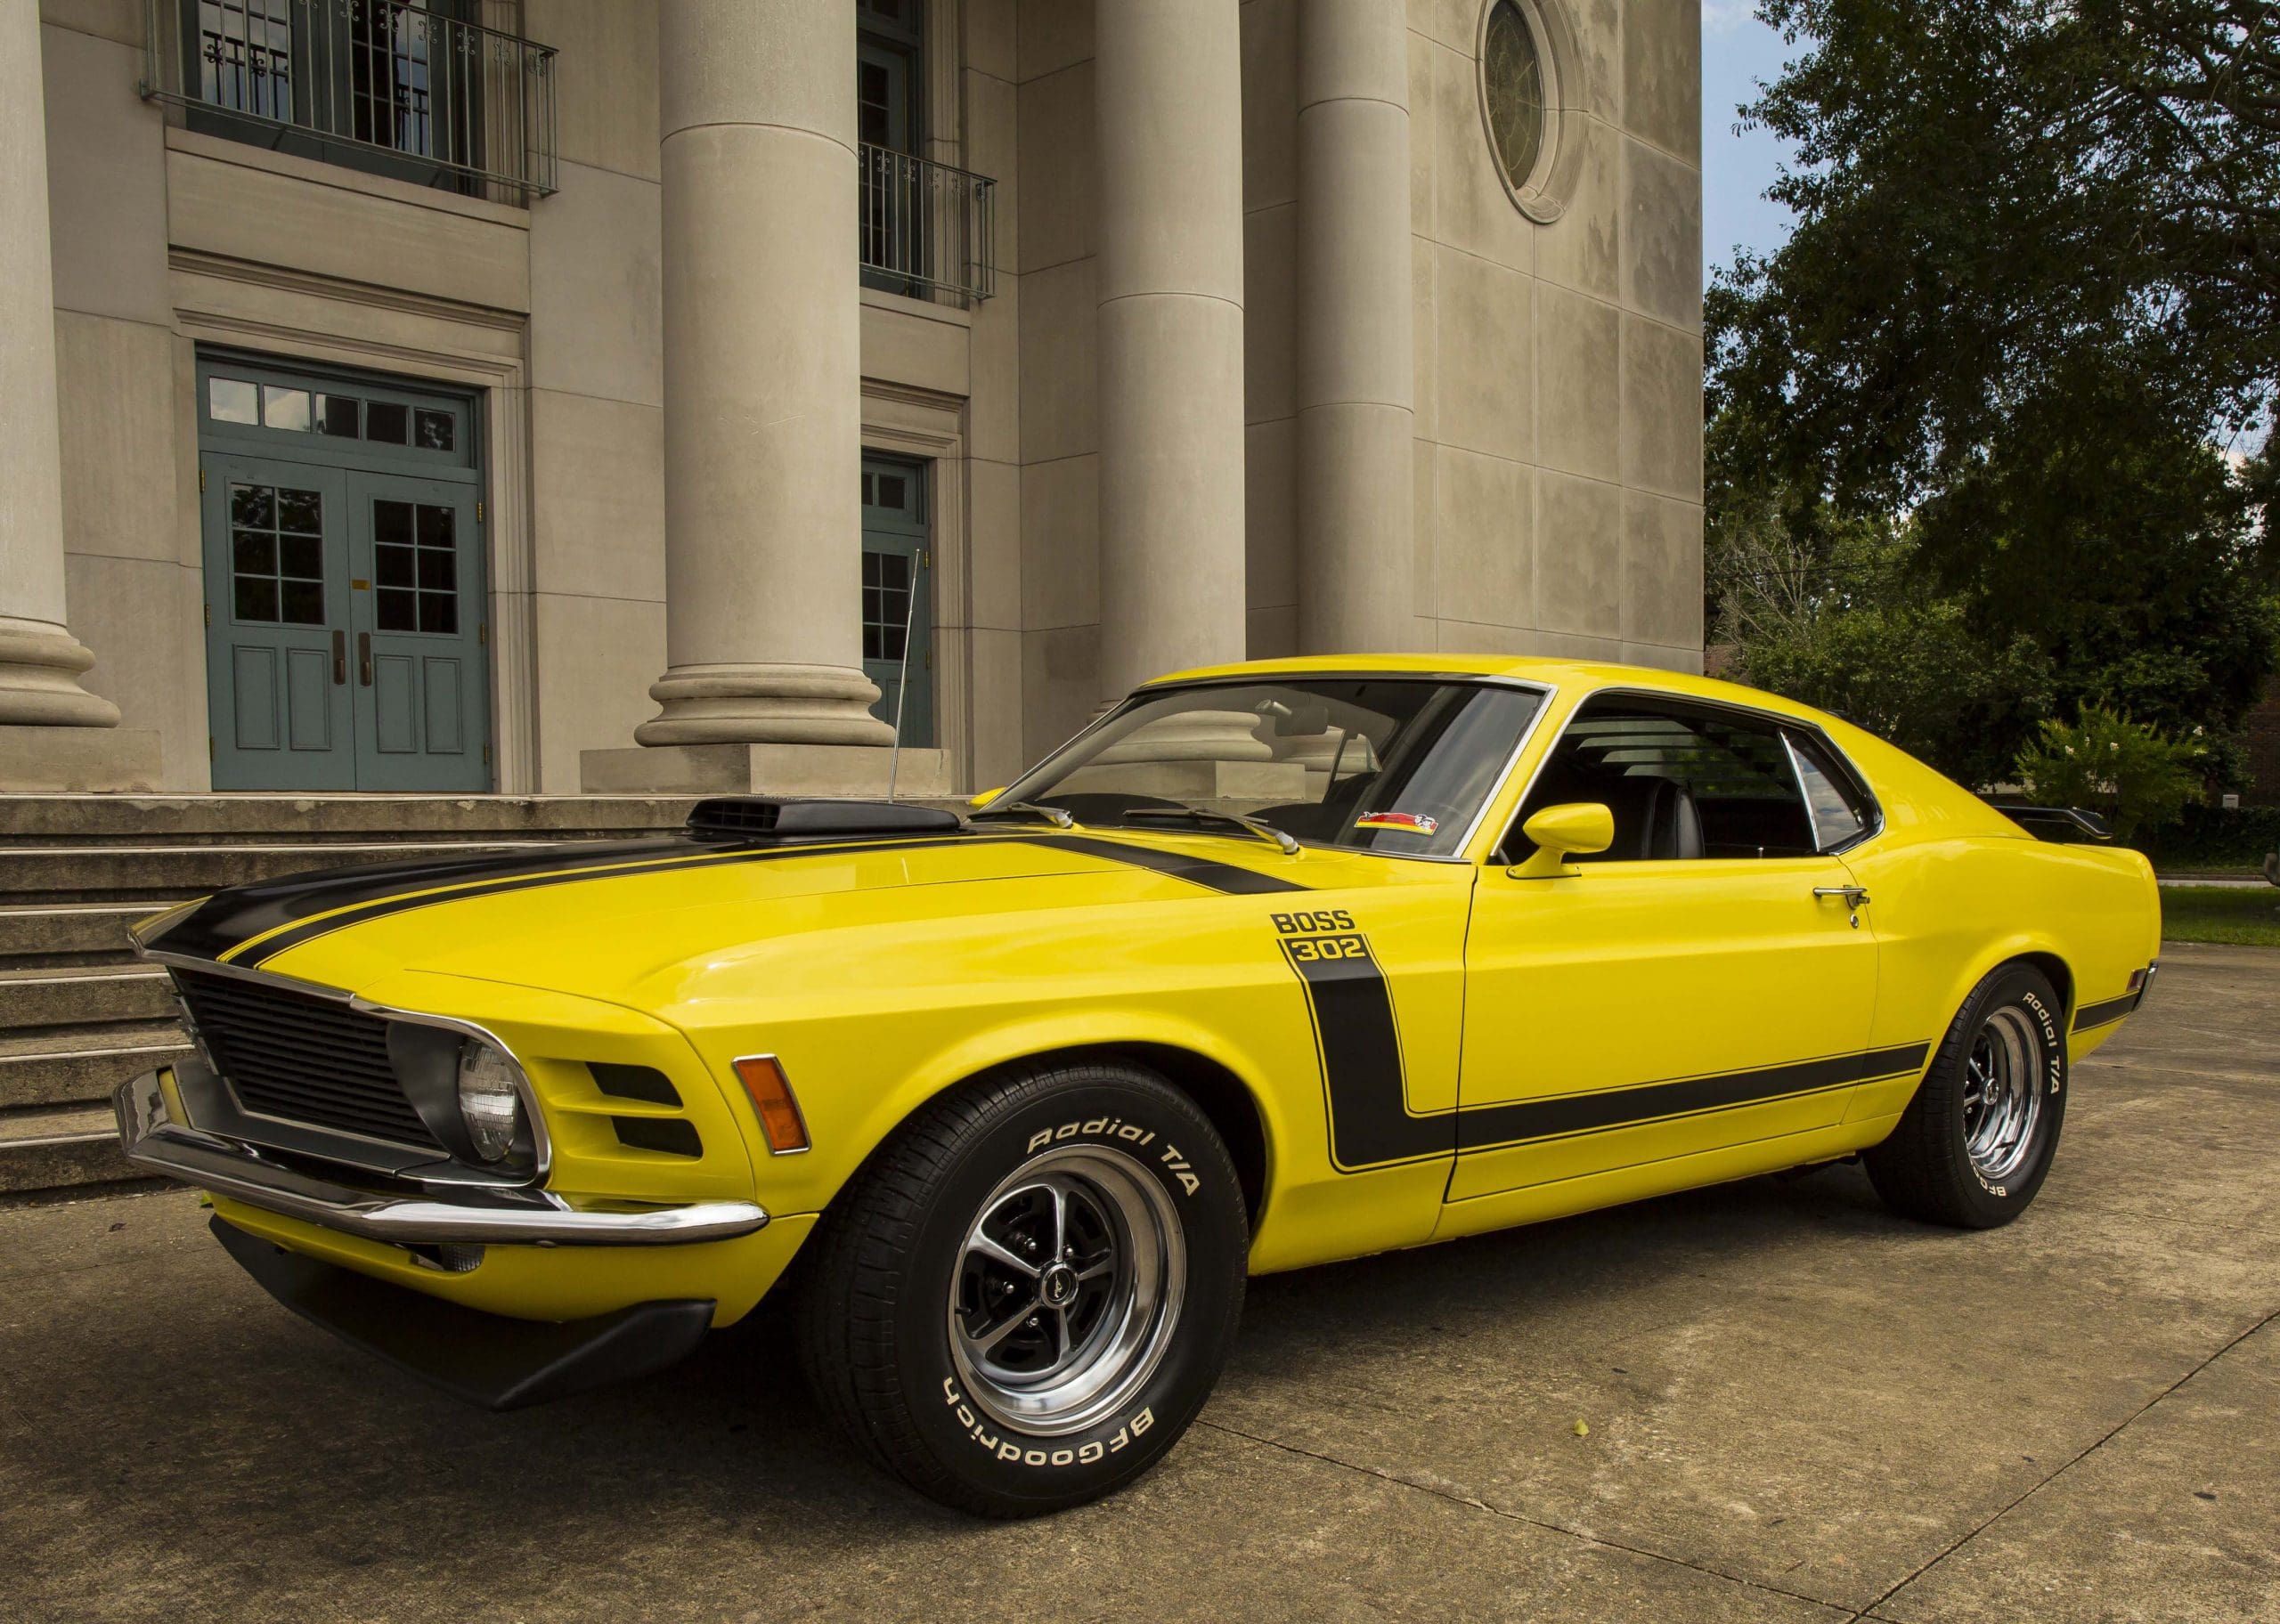 Mustang Of The Day: 1970 Ford Mustang Boss 302